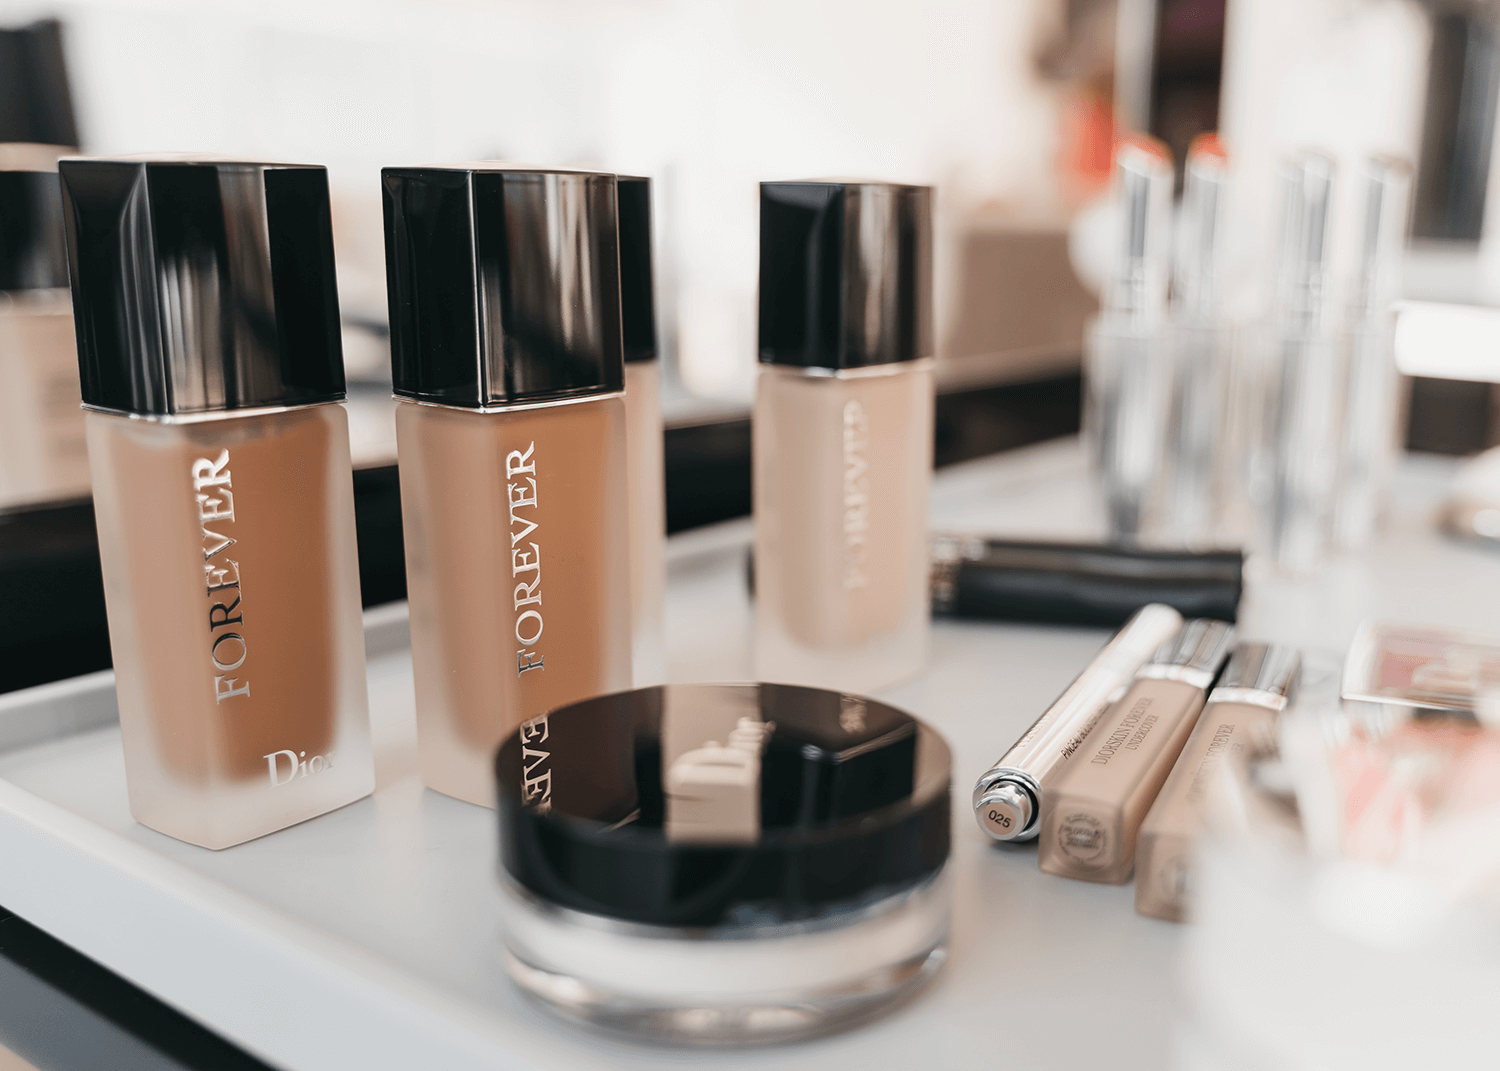 Dior Foundation Makeup on Table